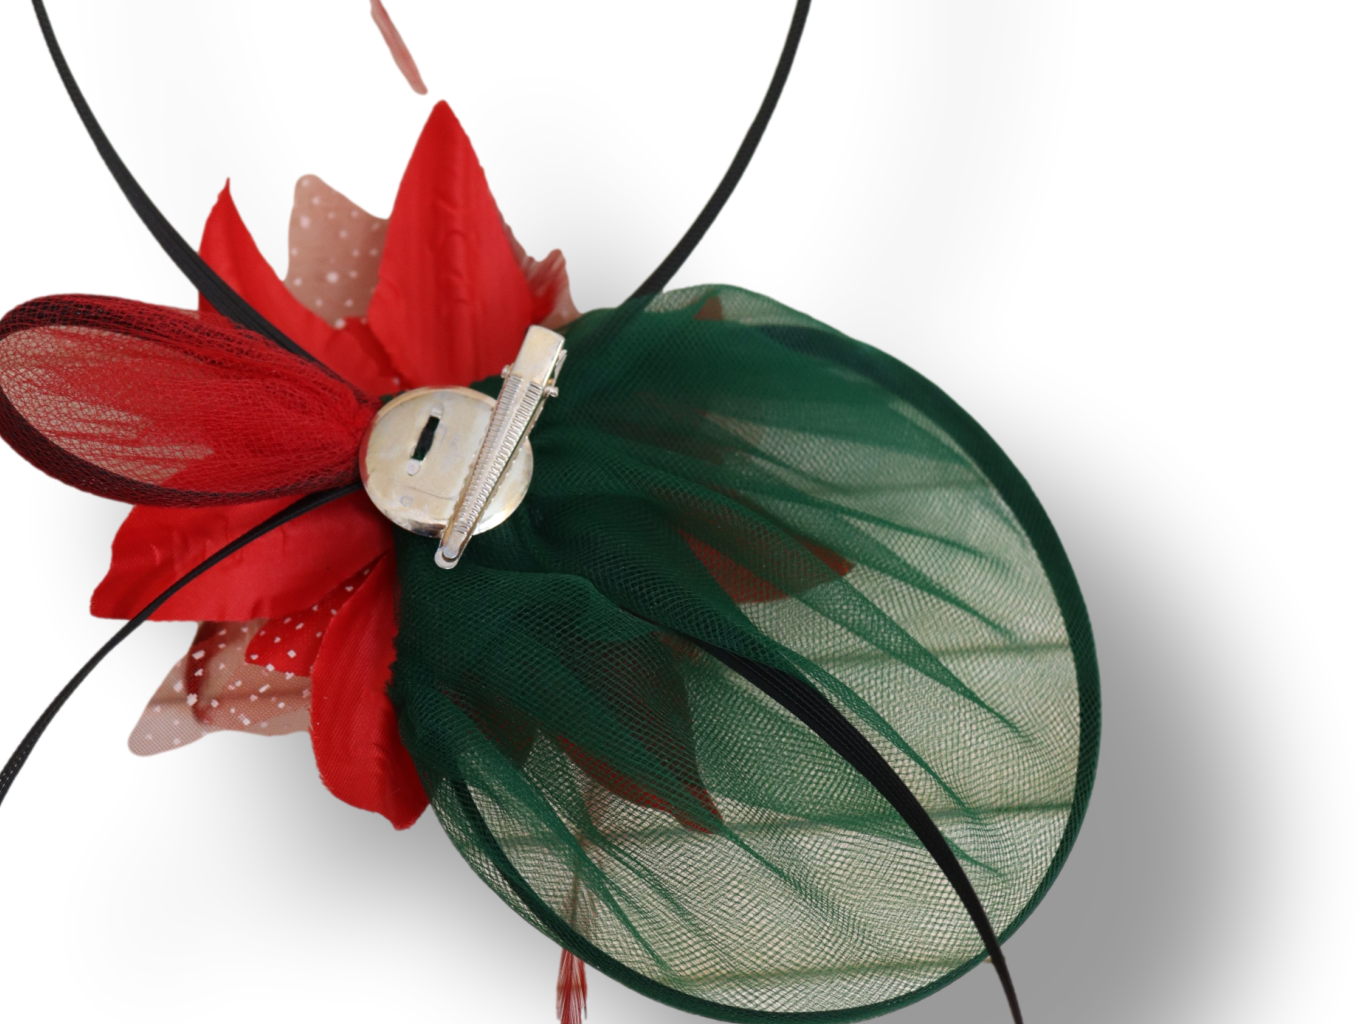 Women's Fascinator Hat with Hair Clip